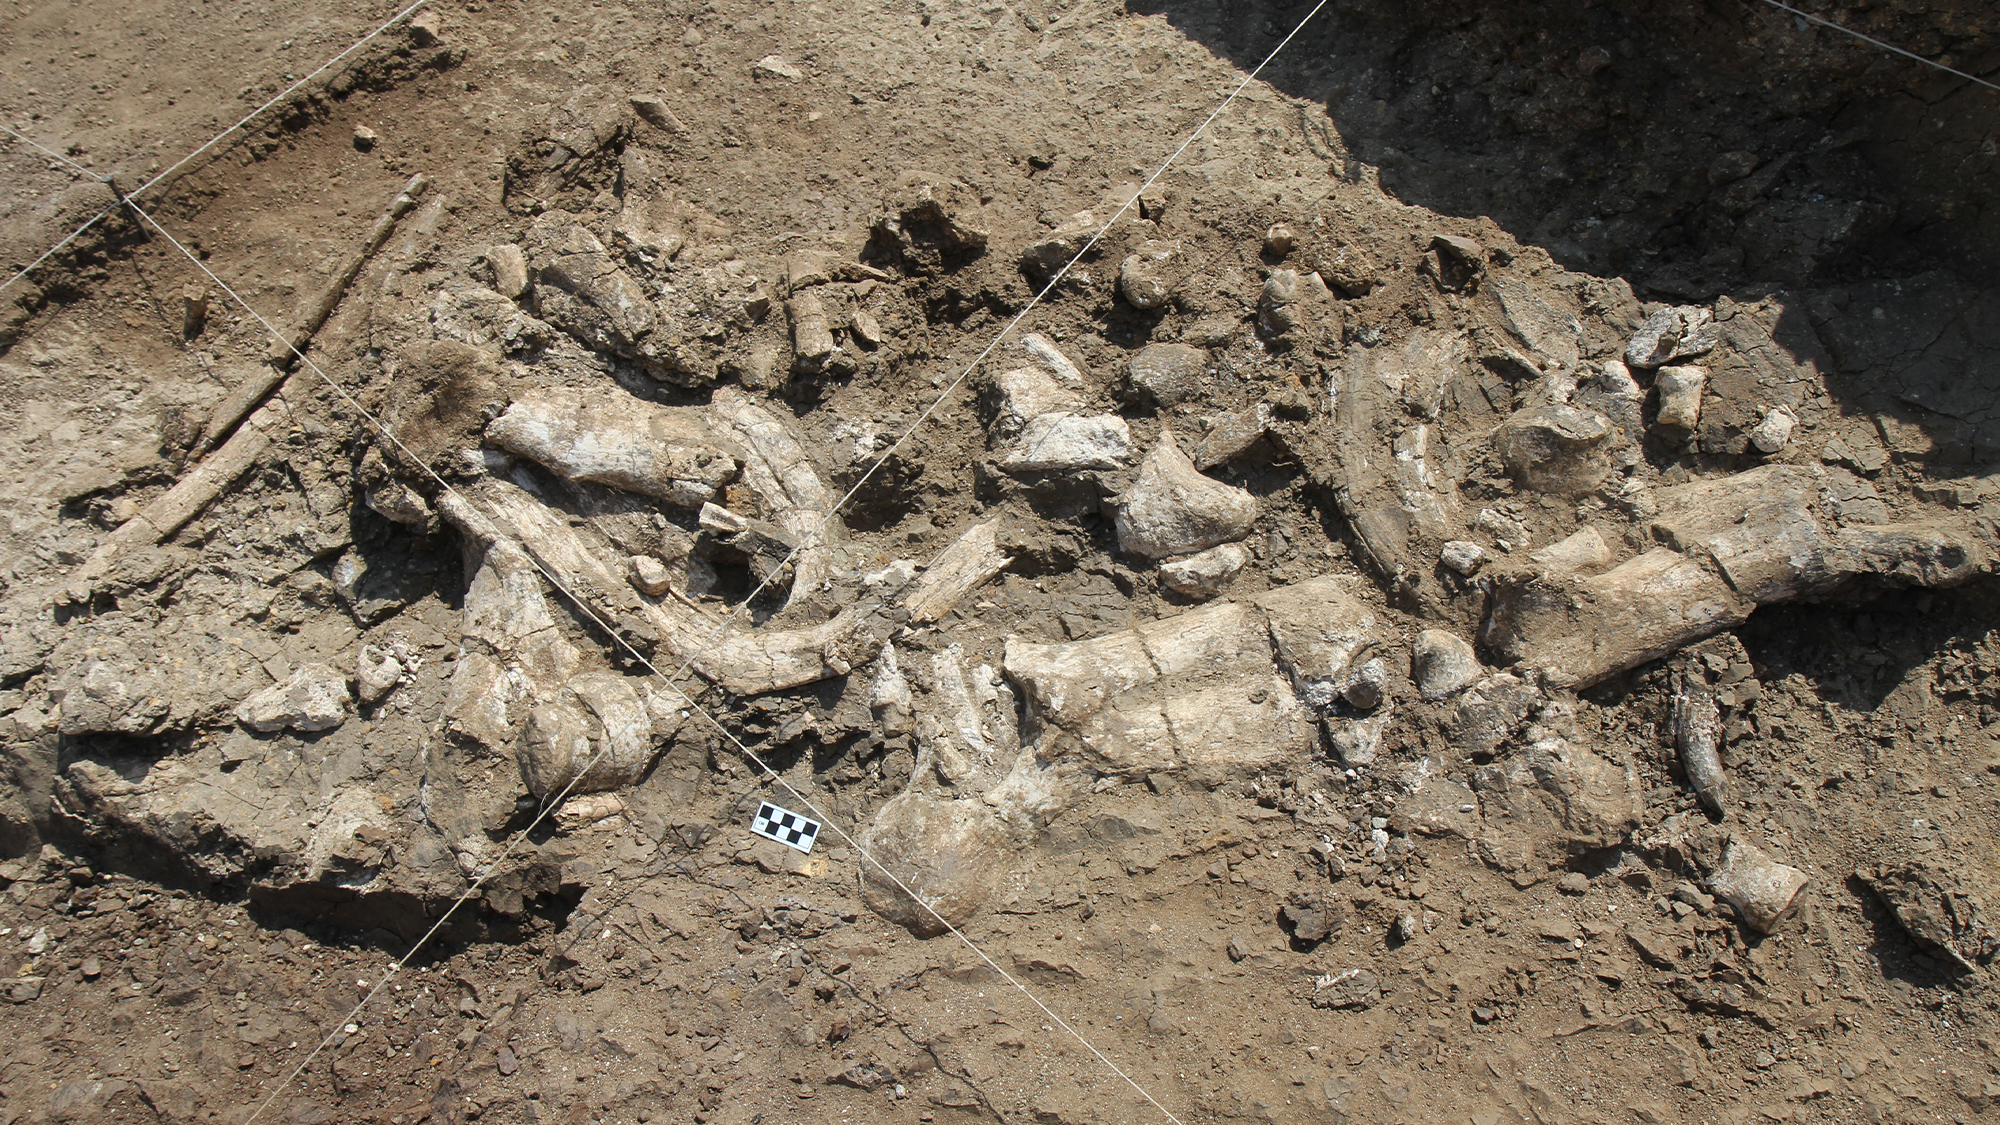 Fossil hippo skeleton and associated Oldowan artifacts at the Nyayanga site in July 2016.